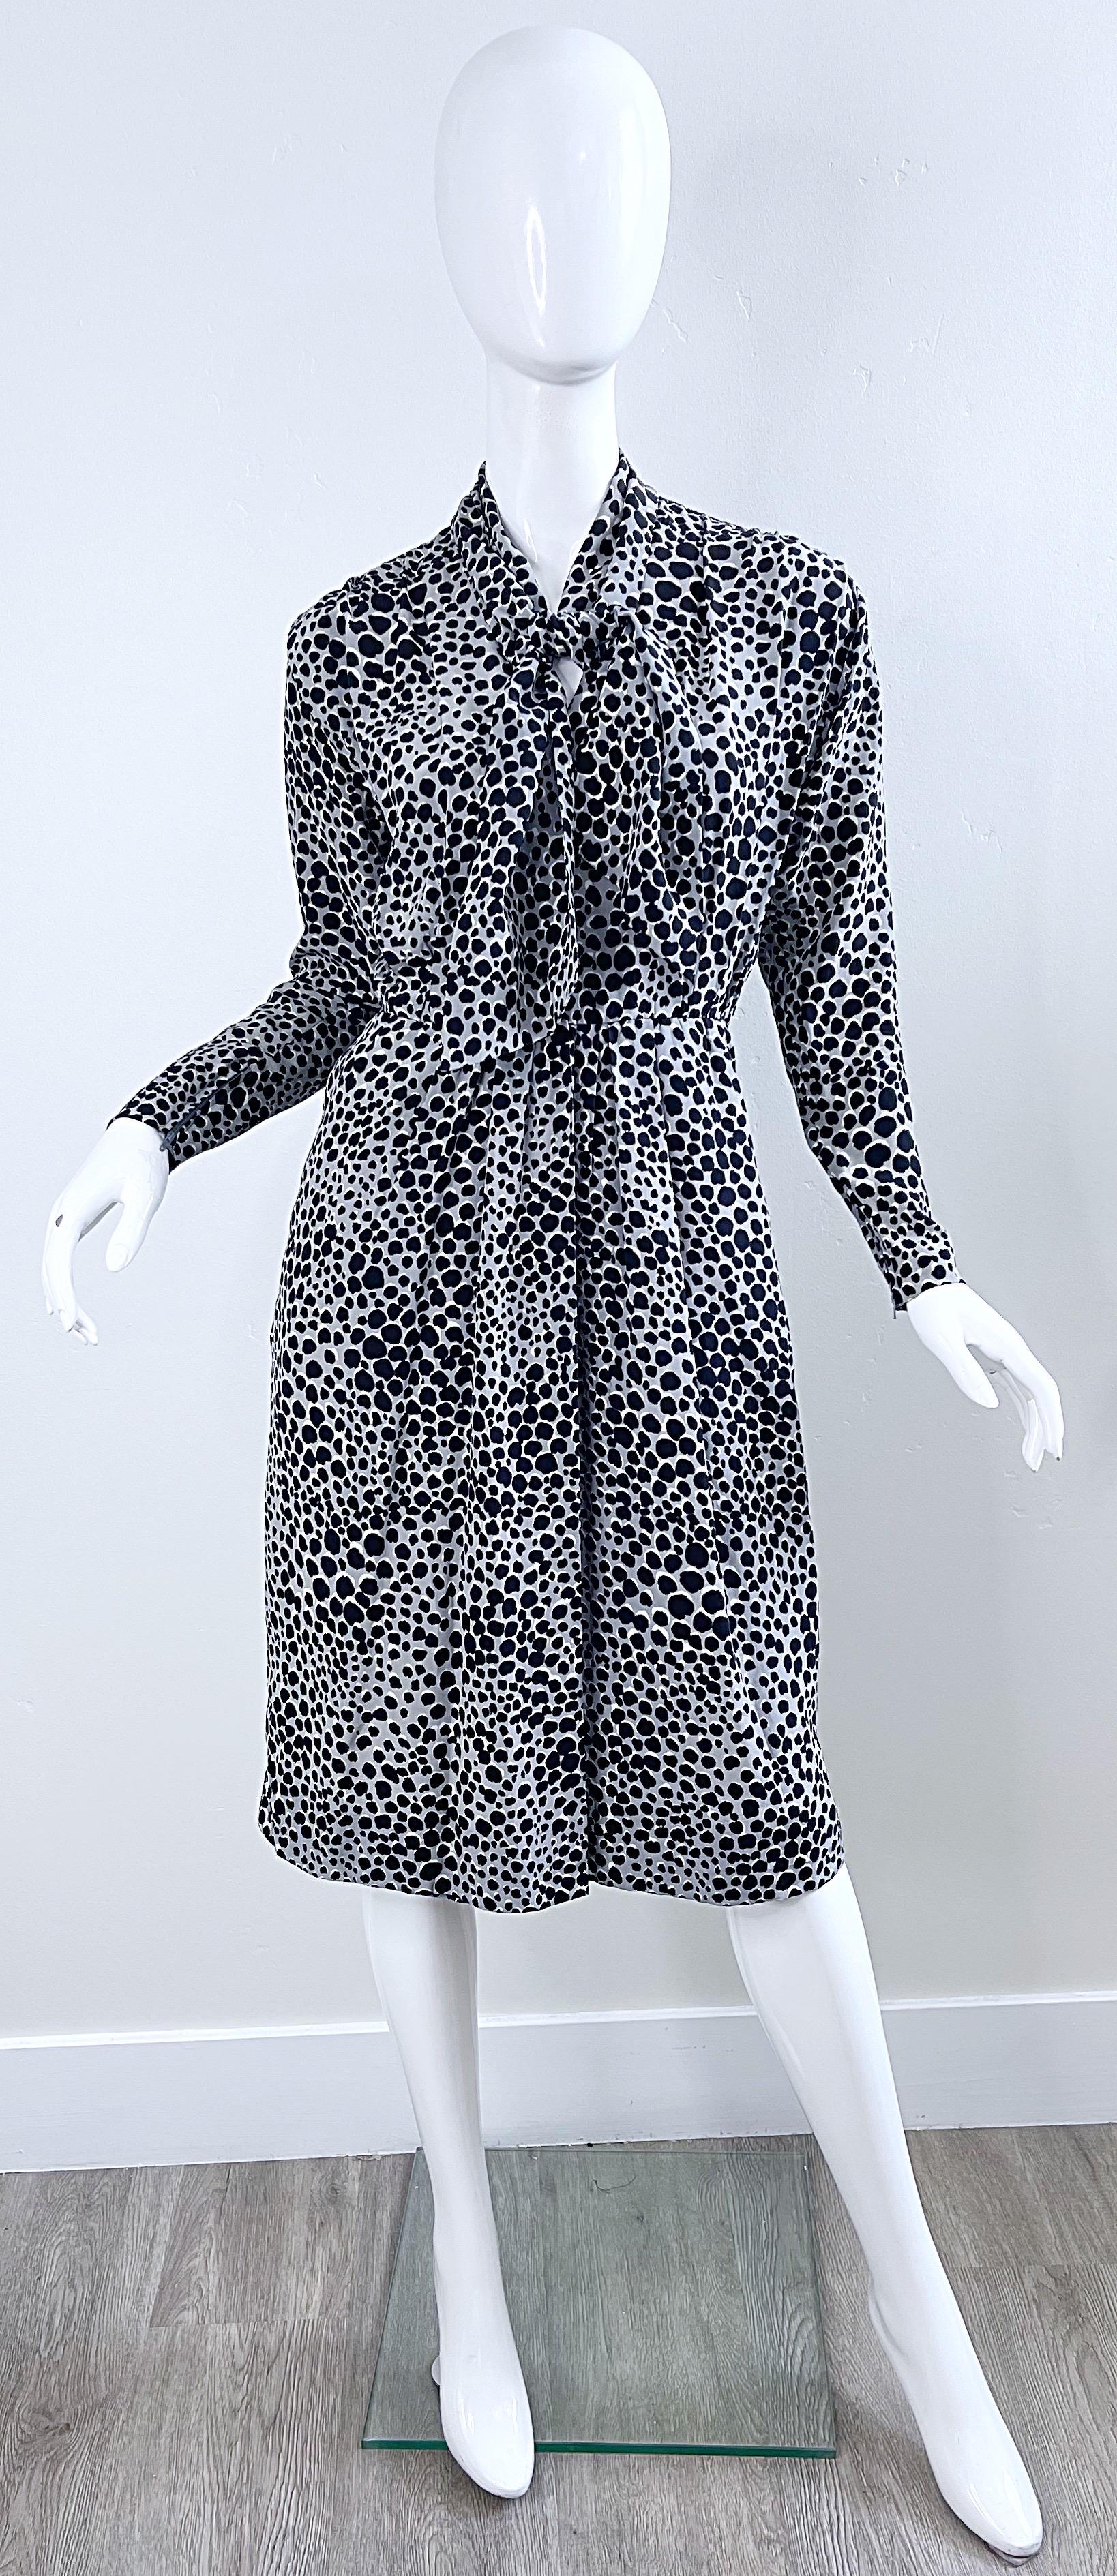 Yves Saint Laurent 1990s Black Gray White Leopard Animal Print Silk YSL Dress In Excellent Condition For Sale In San Diego, CA